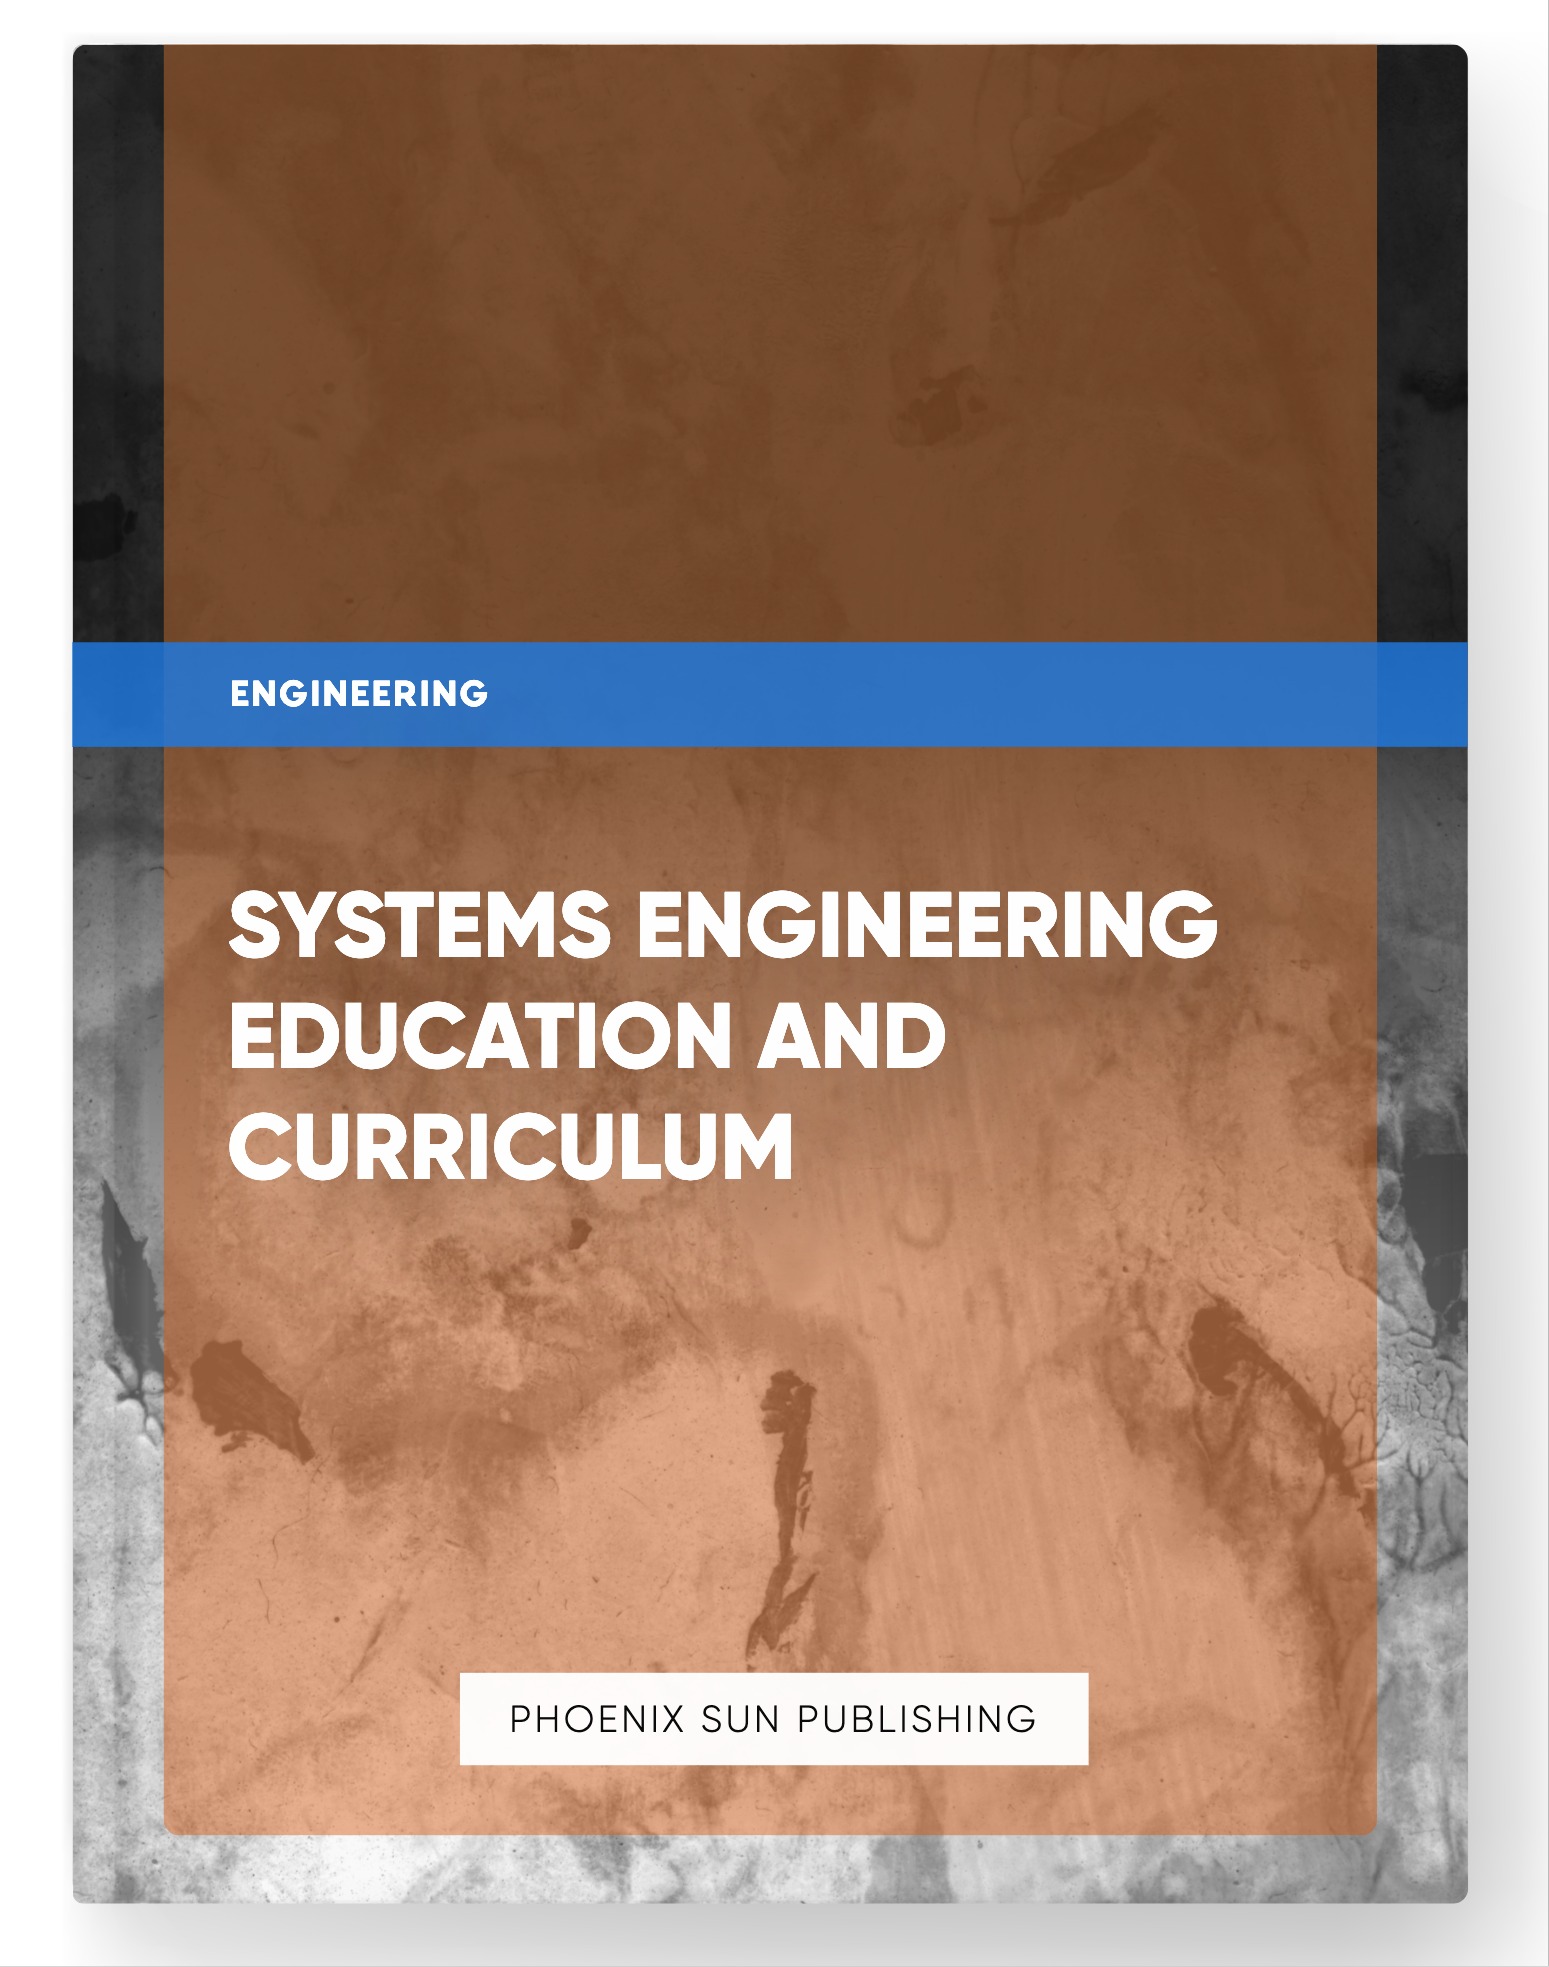 Systems Engineering Education and Curriculum